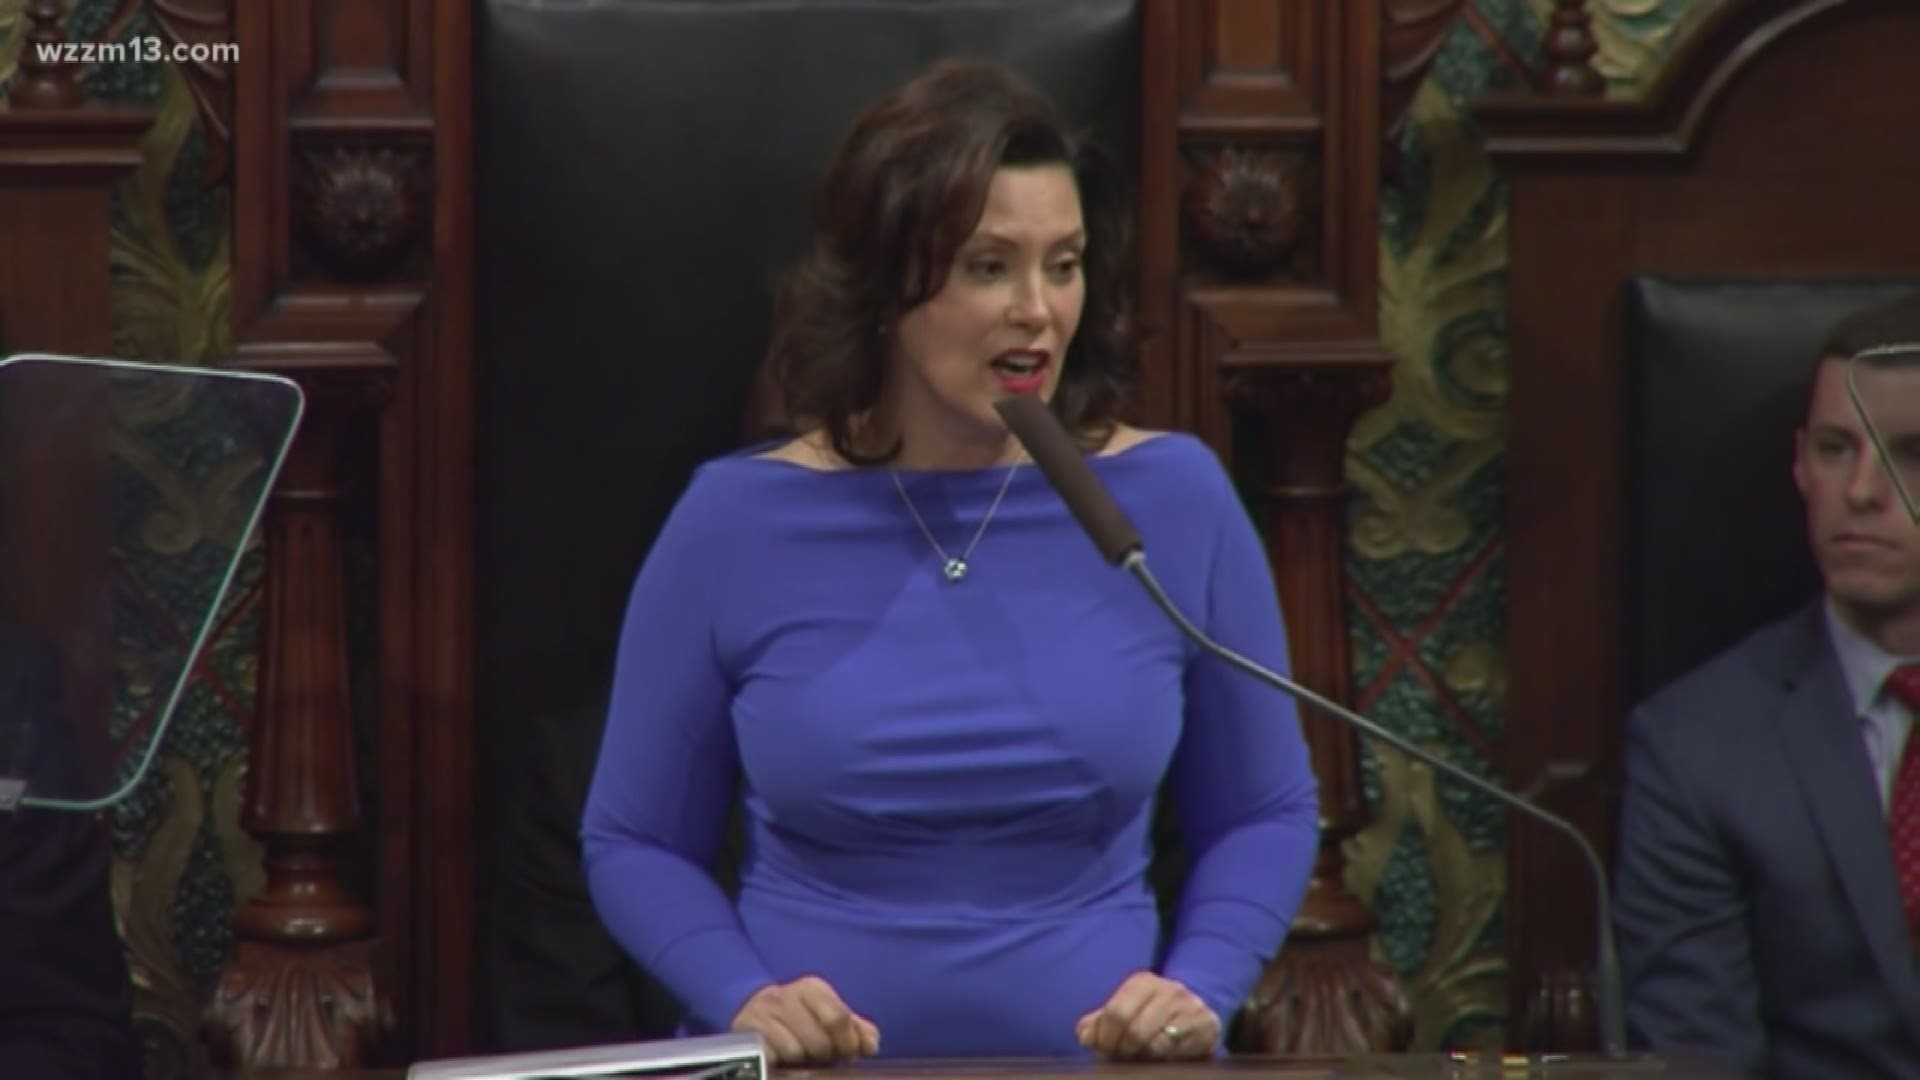 Democratic Gov. Gretchen Whitmer called Tuesday for nearly tripling Michigan's per-gallon gas tax — and making the state home to the country's highest fuel taxes — in order to improve aging roads that she warned would only get worse without a major influx of new spending.